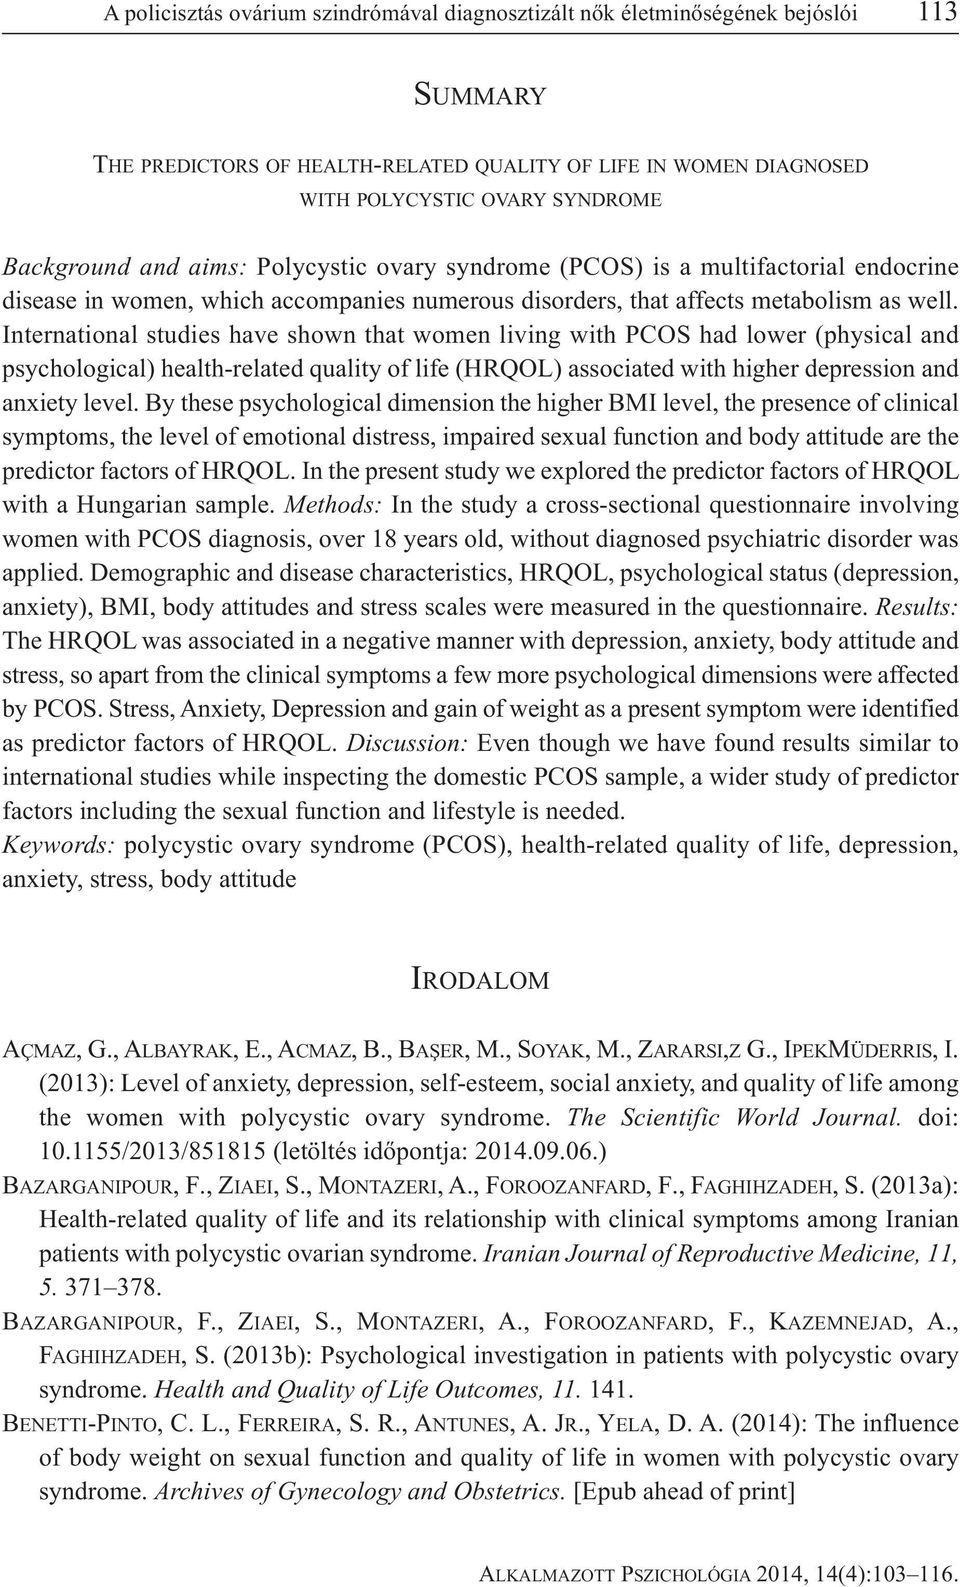 International studies have shown that women living with PCOS had lower (physical and psychological) health-related quality of life (HRQOL) associated with higher depression and anxiety level.